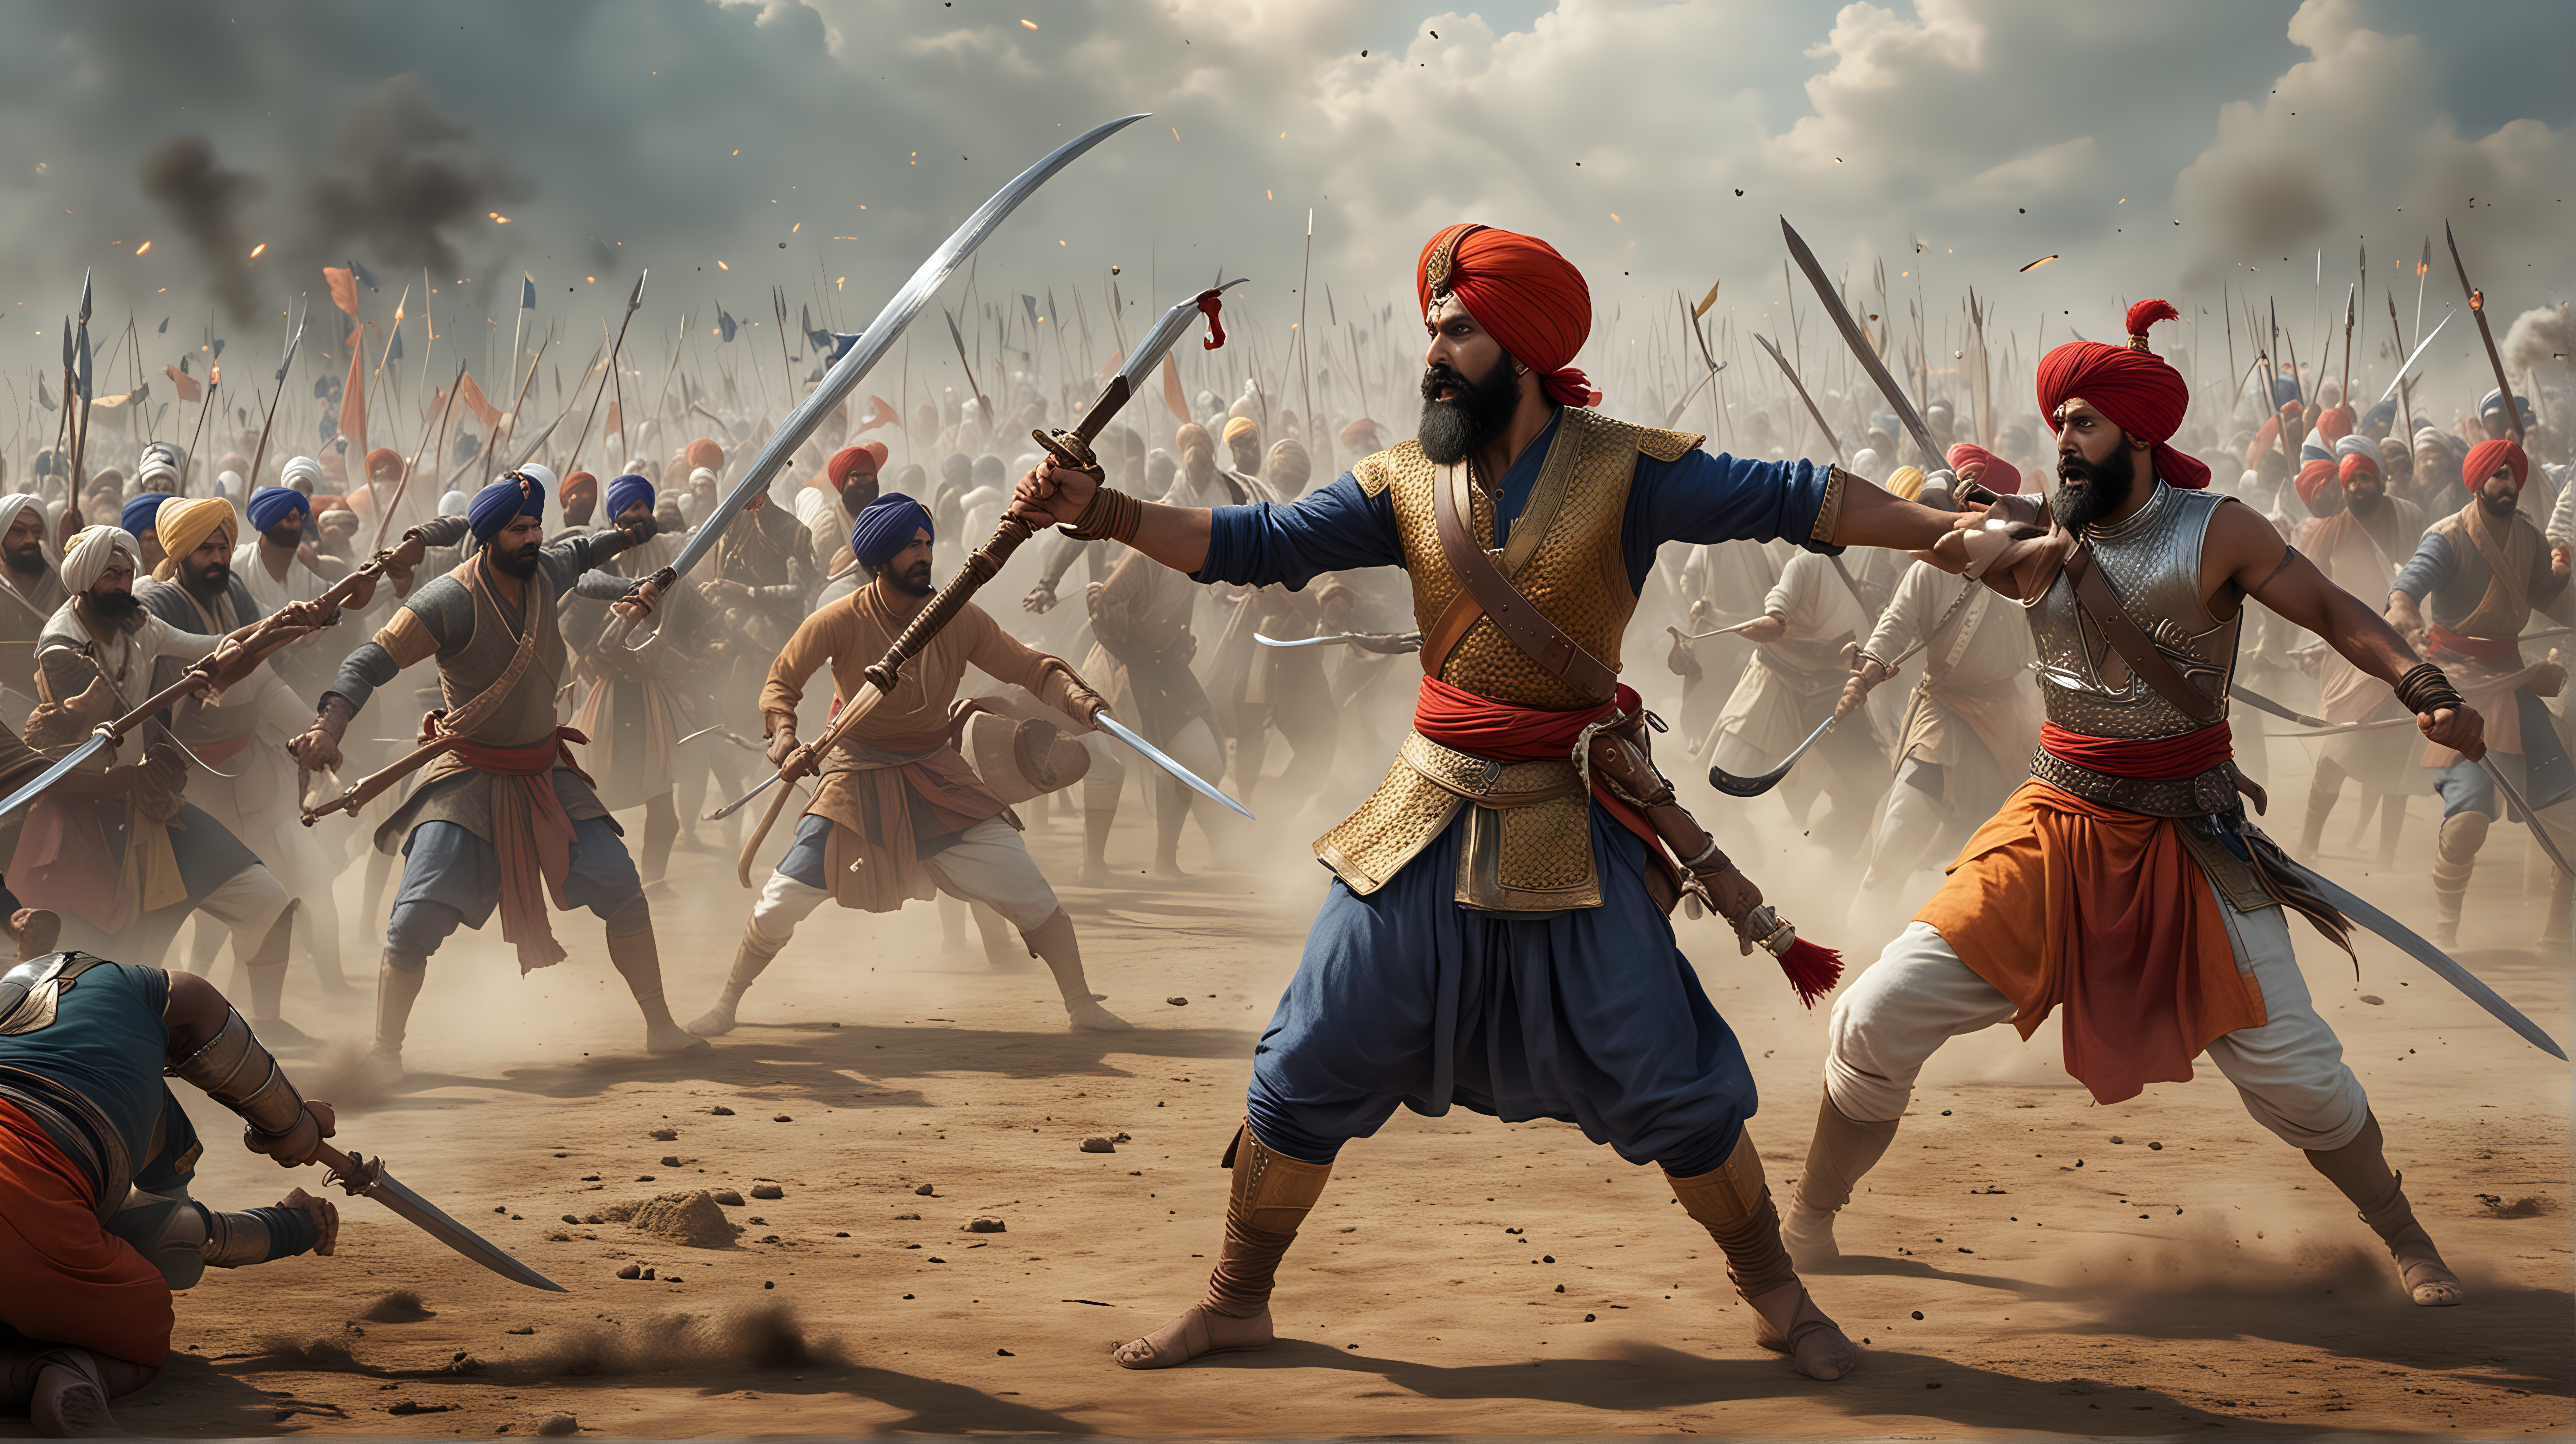 sikh warriors fighting with the Moghul empire set 300 years ago in India. visual depiction of the clash of steel in battle. "V6"